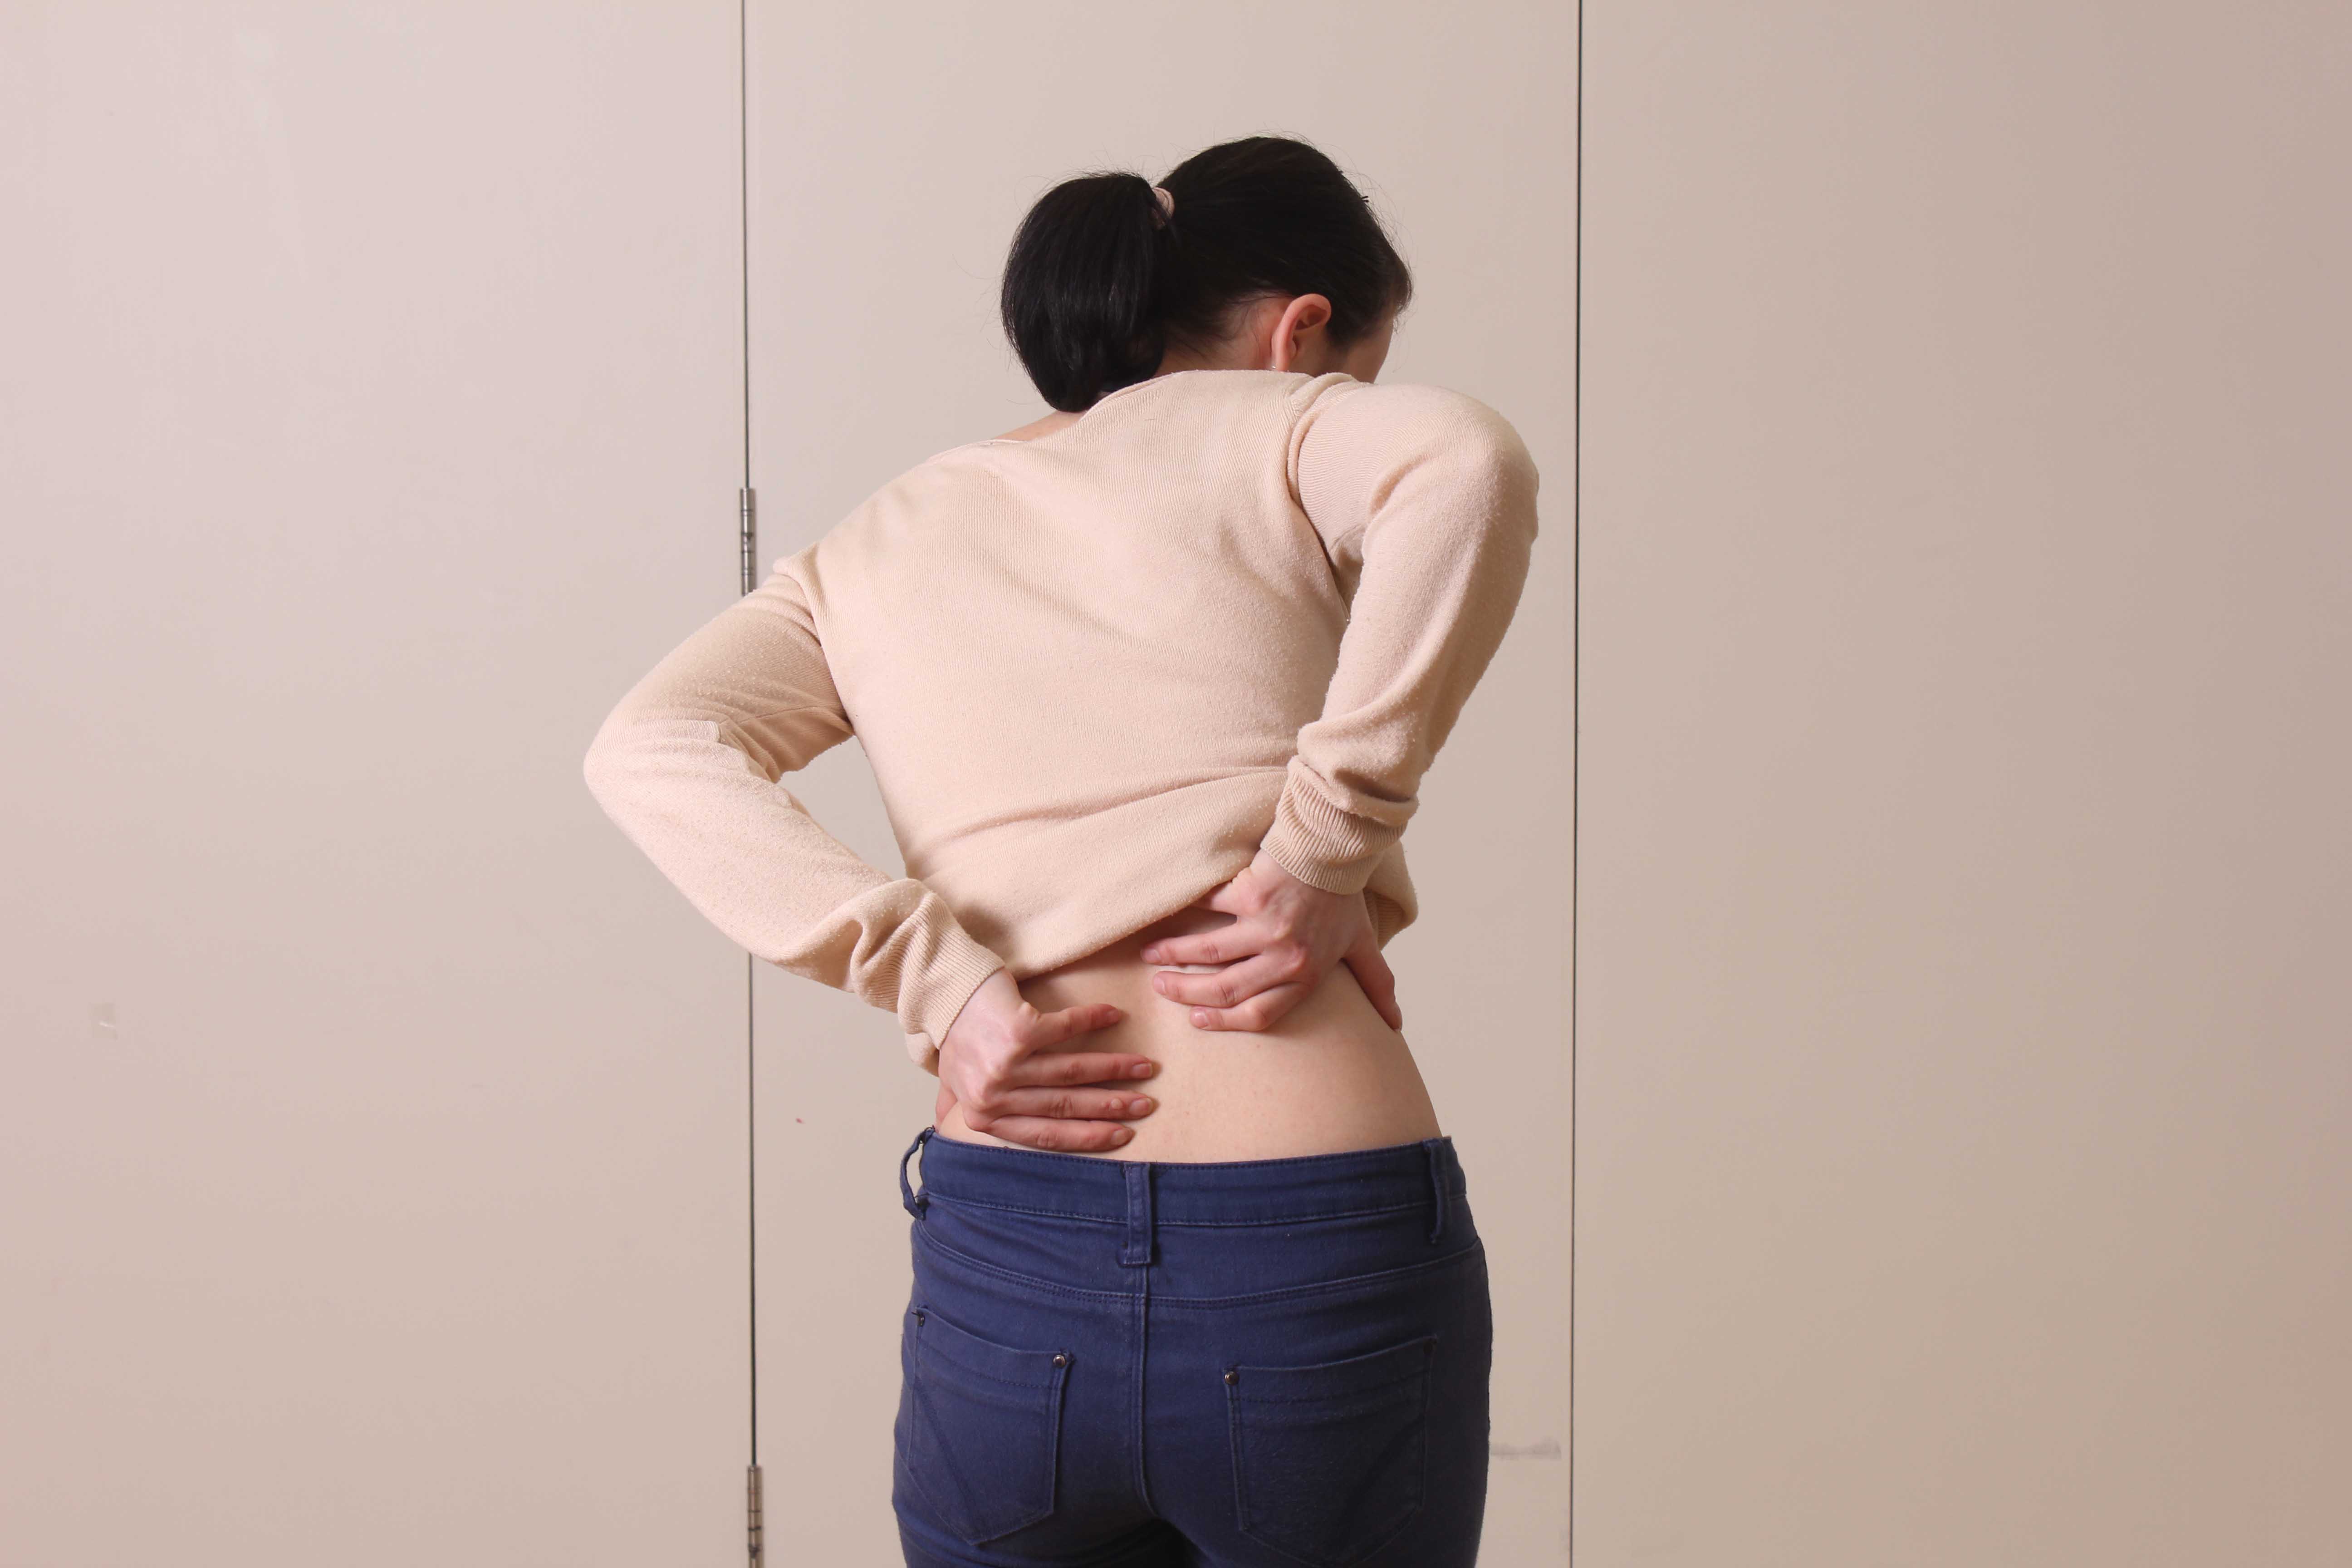 Pain associated with the muscles and connective tissues of the lower back